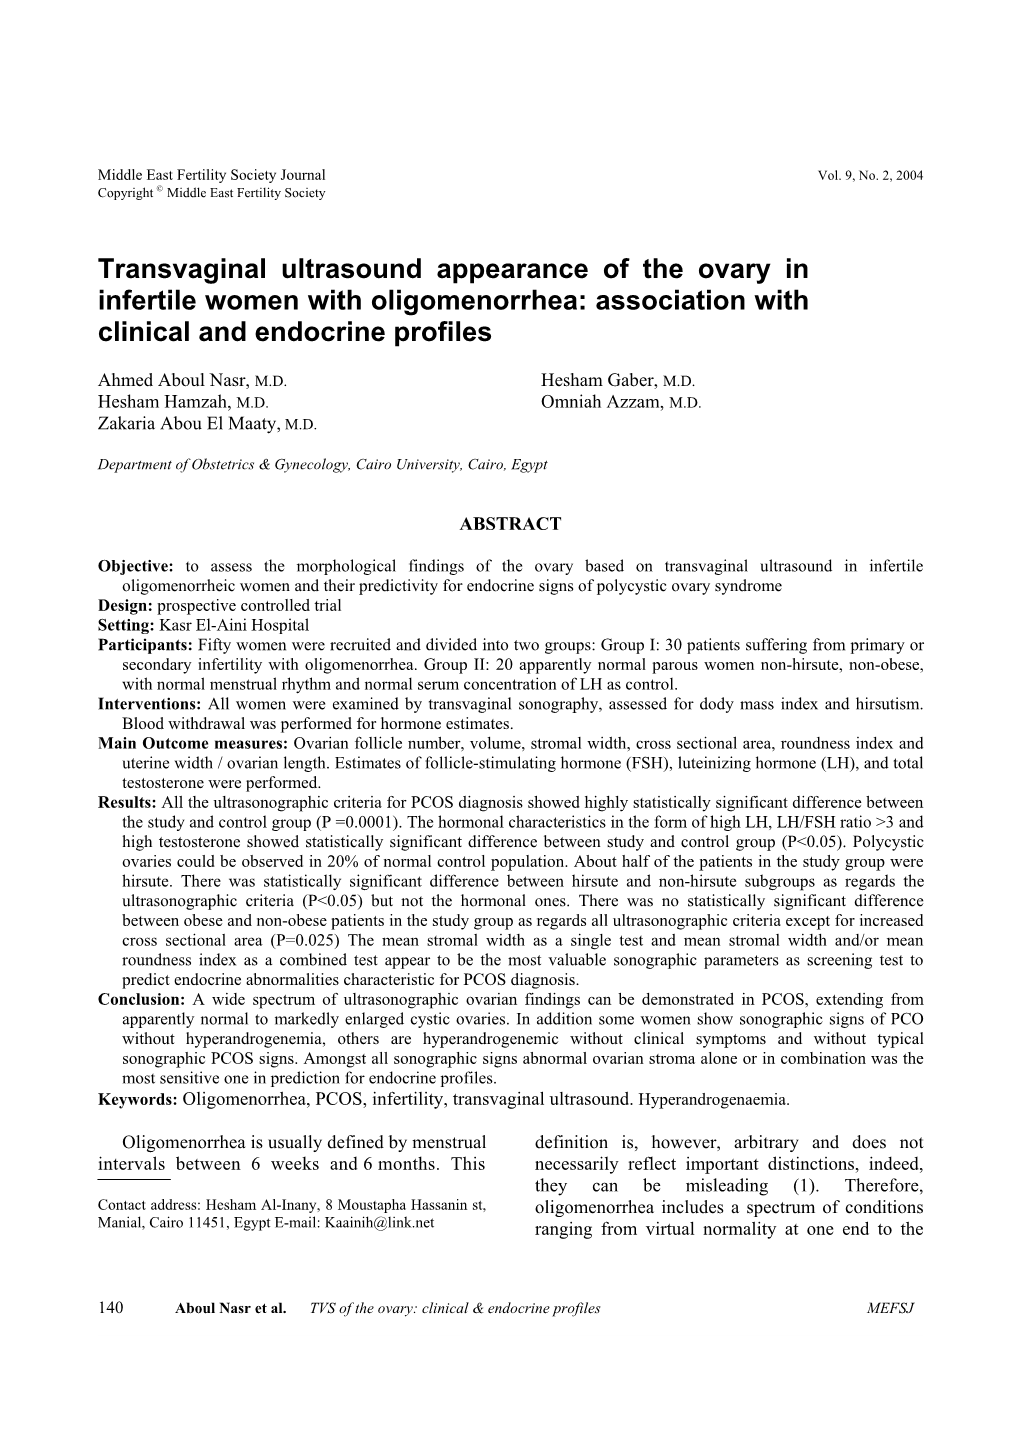 Transvaginal Ultrasound Appearance of the Ovary in Infertile Women with Oligomenorrhea: Association with Clinical and Endocrine Profiles